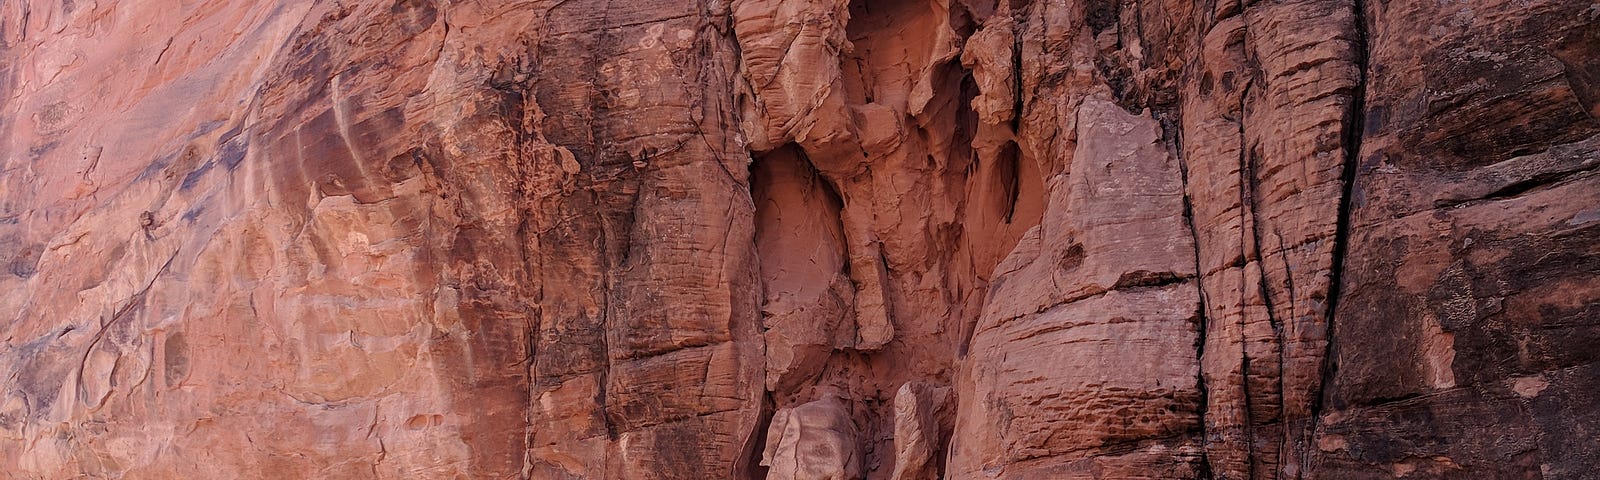 A woman reaches up to a red rock that looks likean animal’s head looking down with a smile.